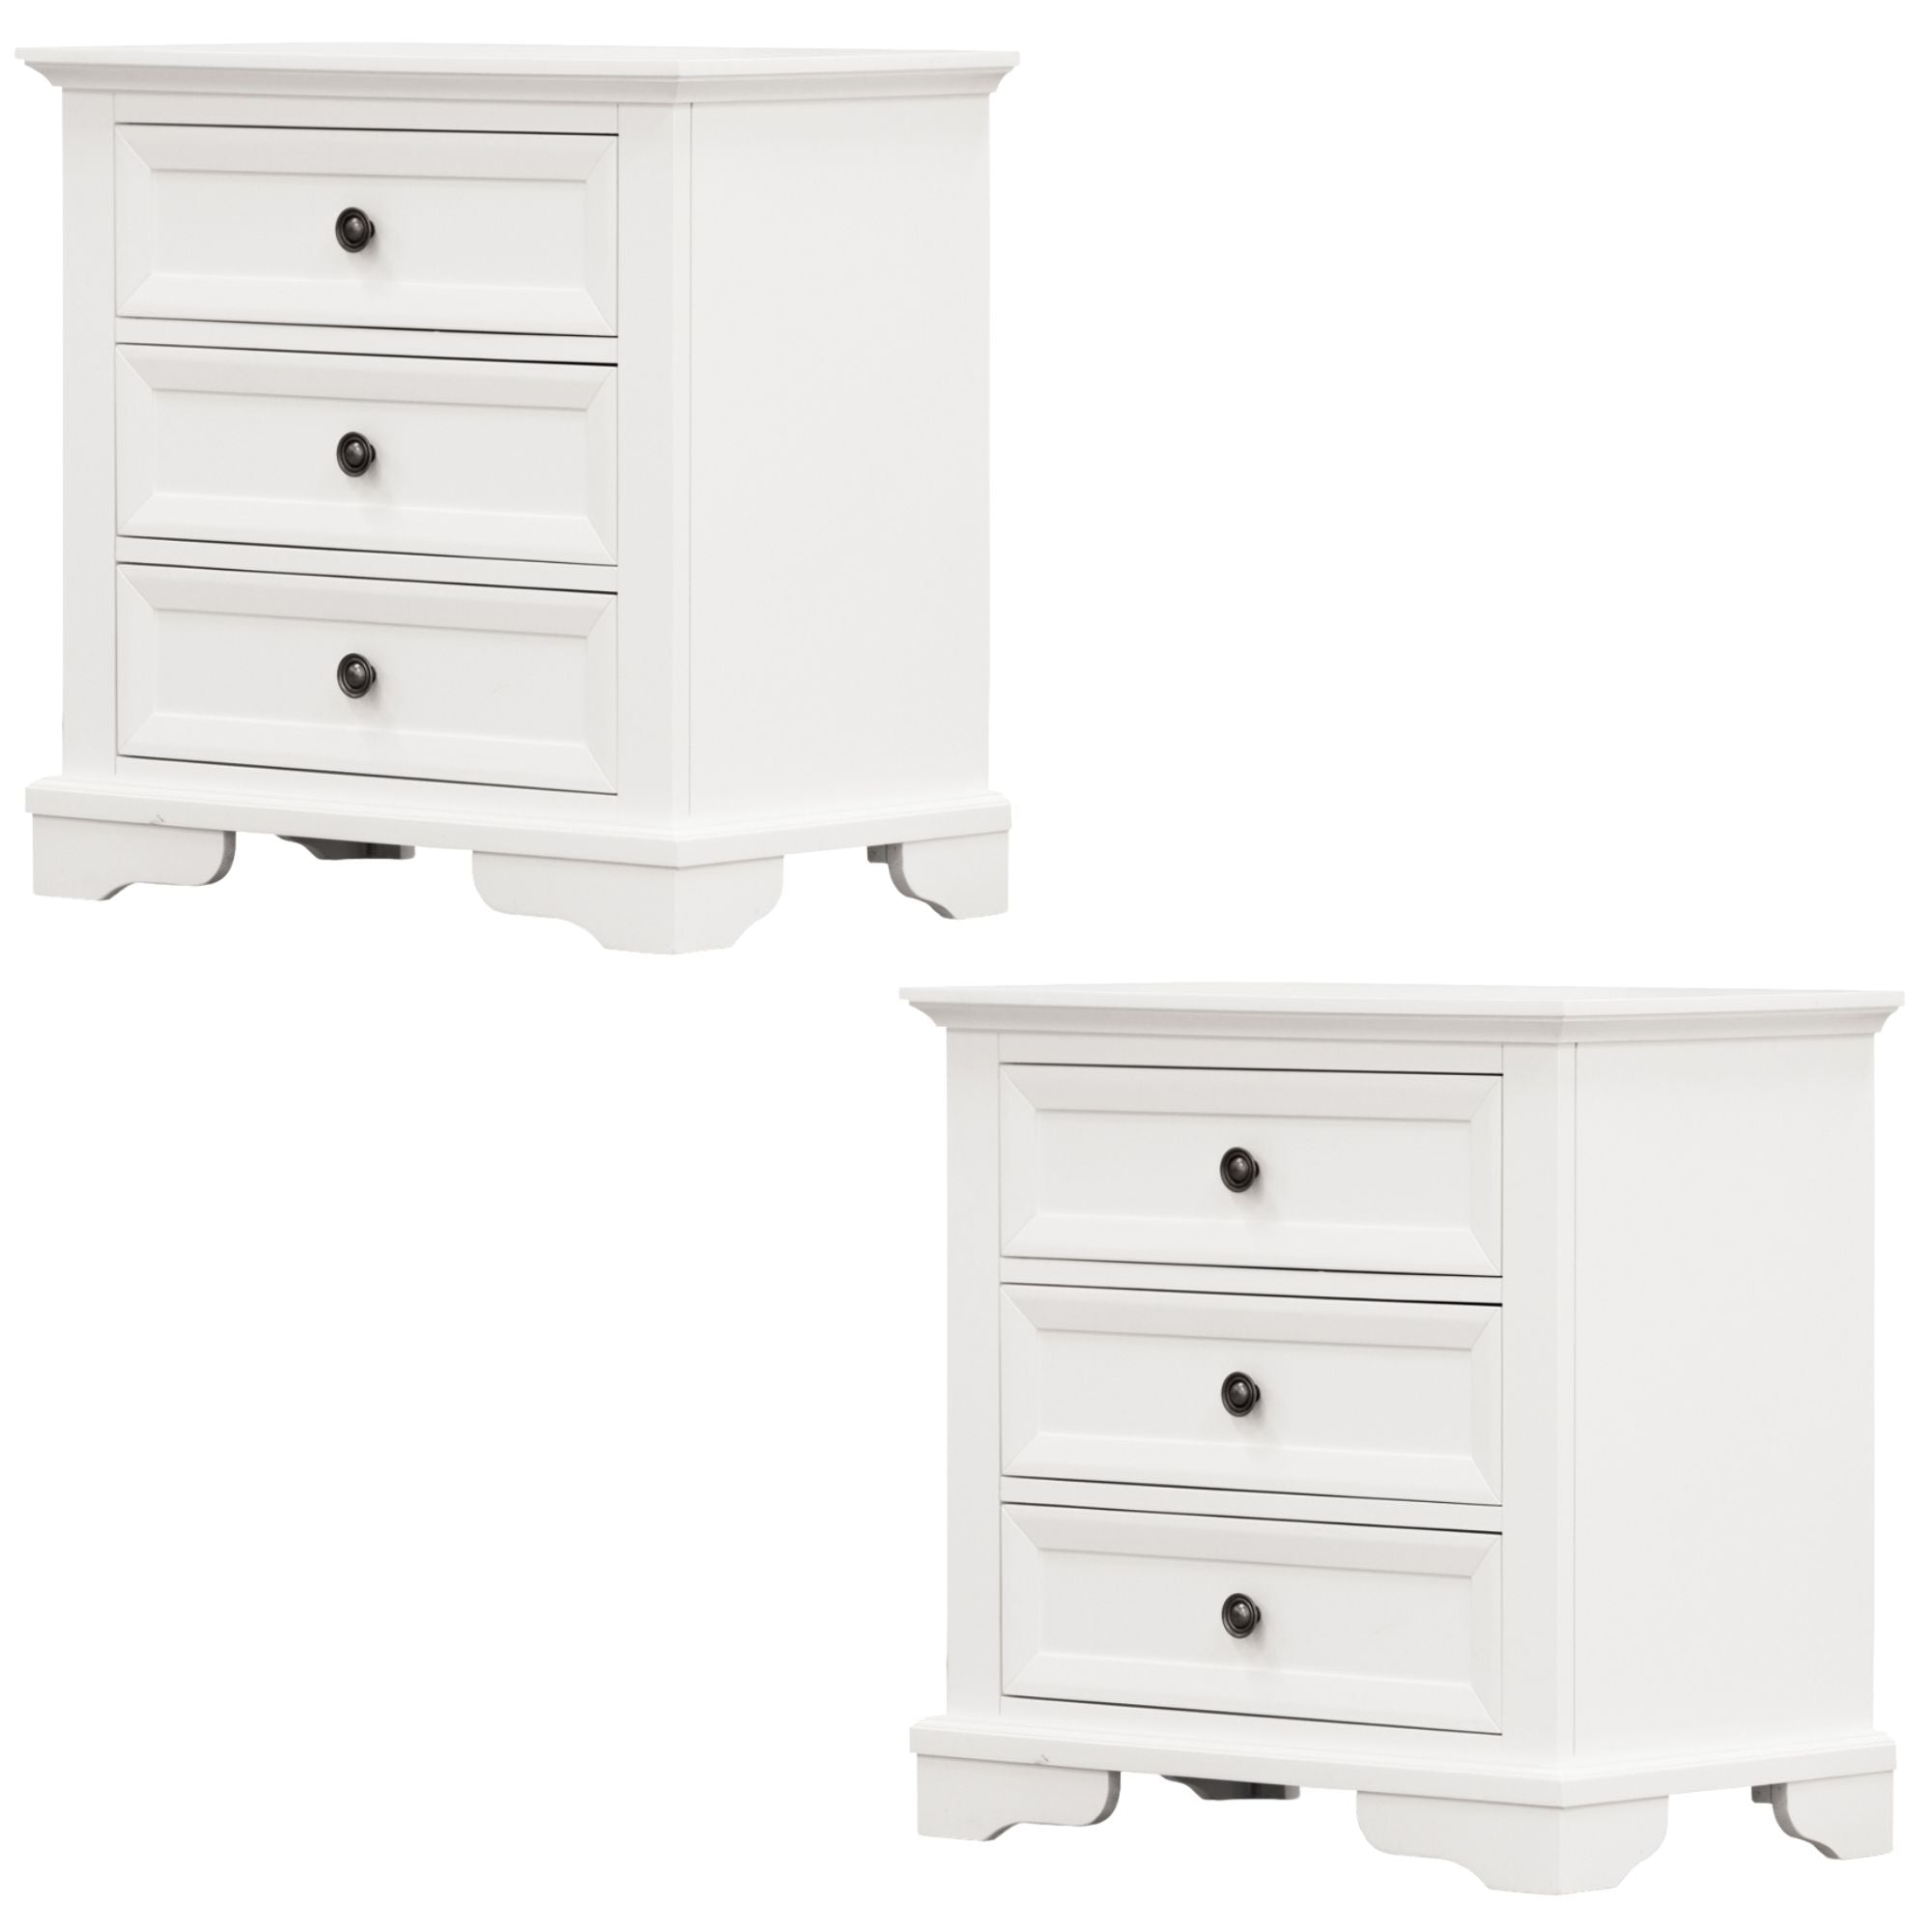 Back in Stock! No Assembly Required On This Set Of Two Bedside Tables With Three Drawers - White